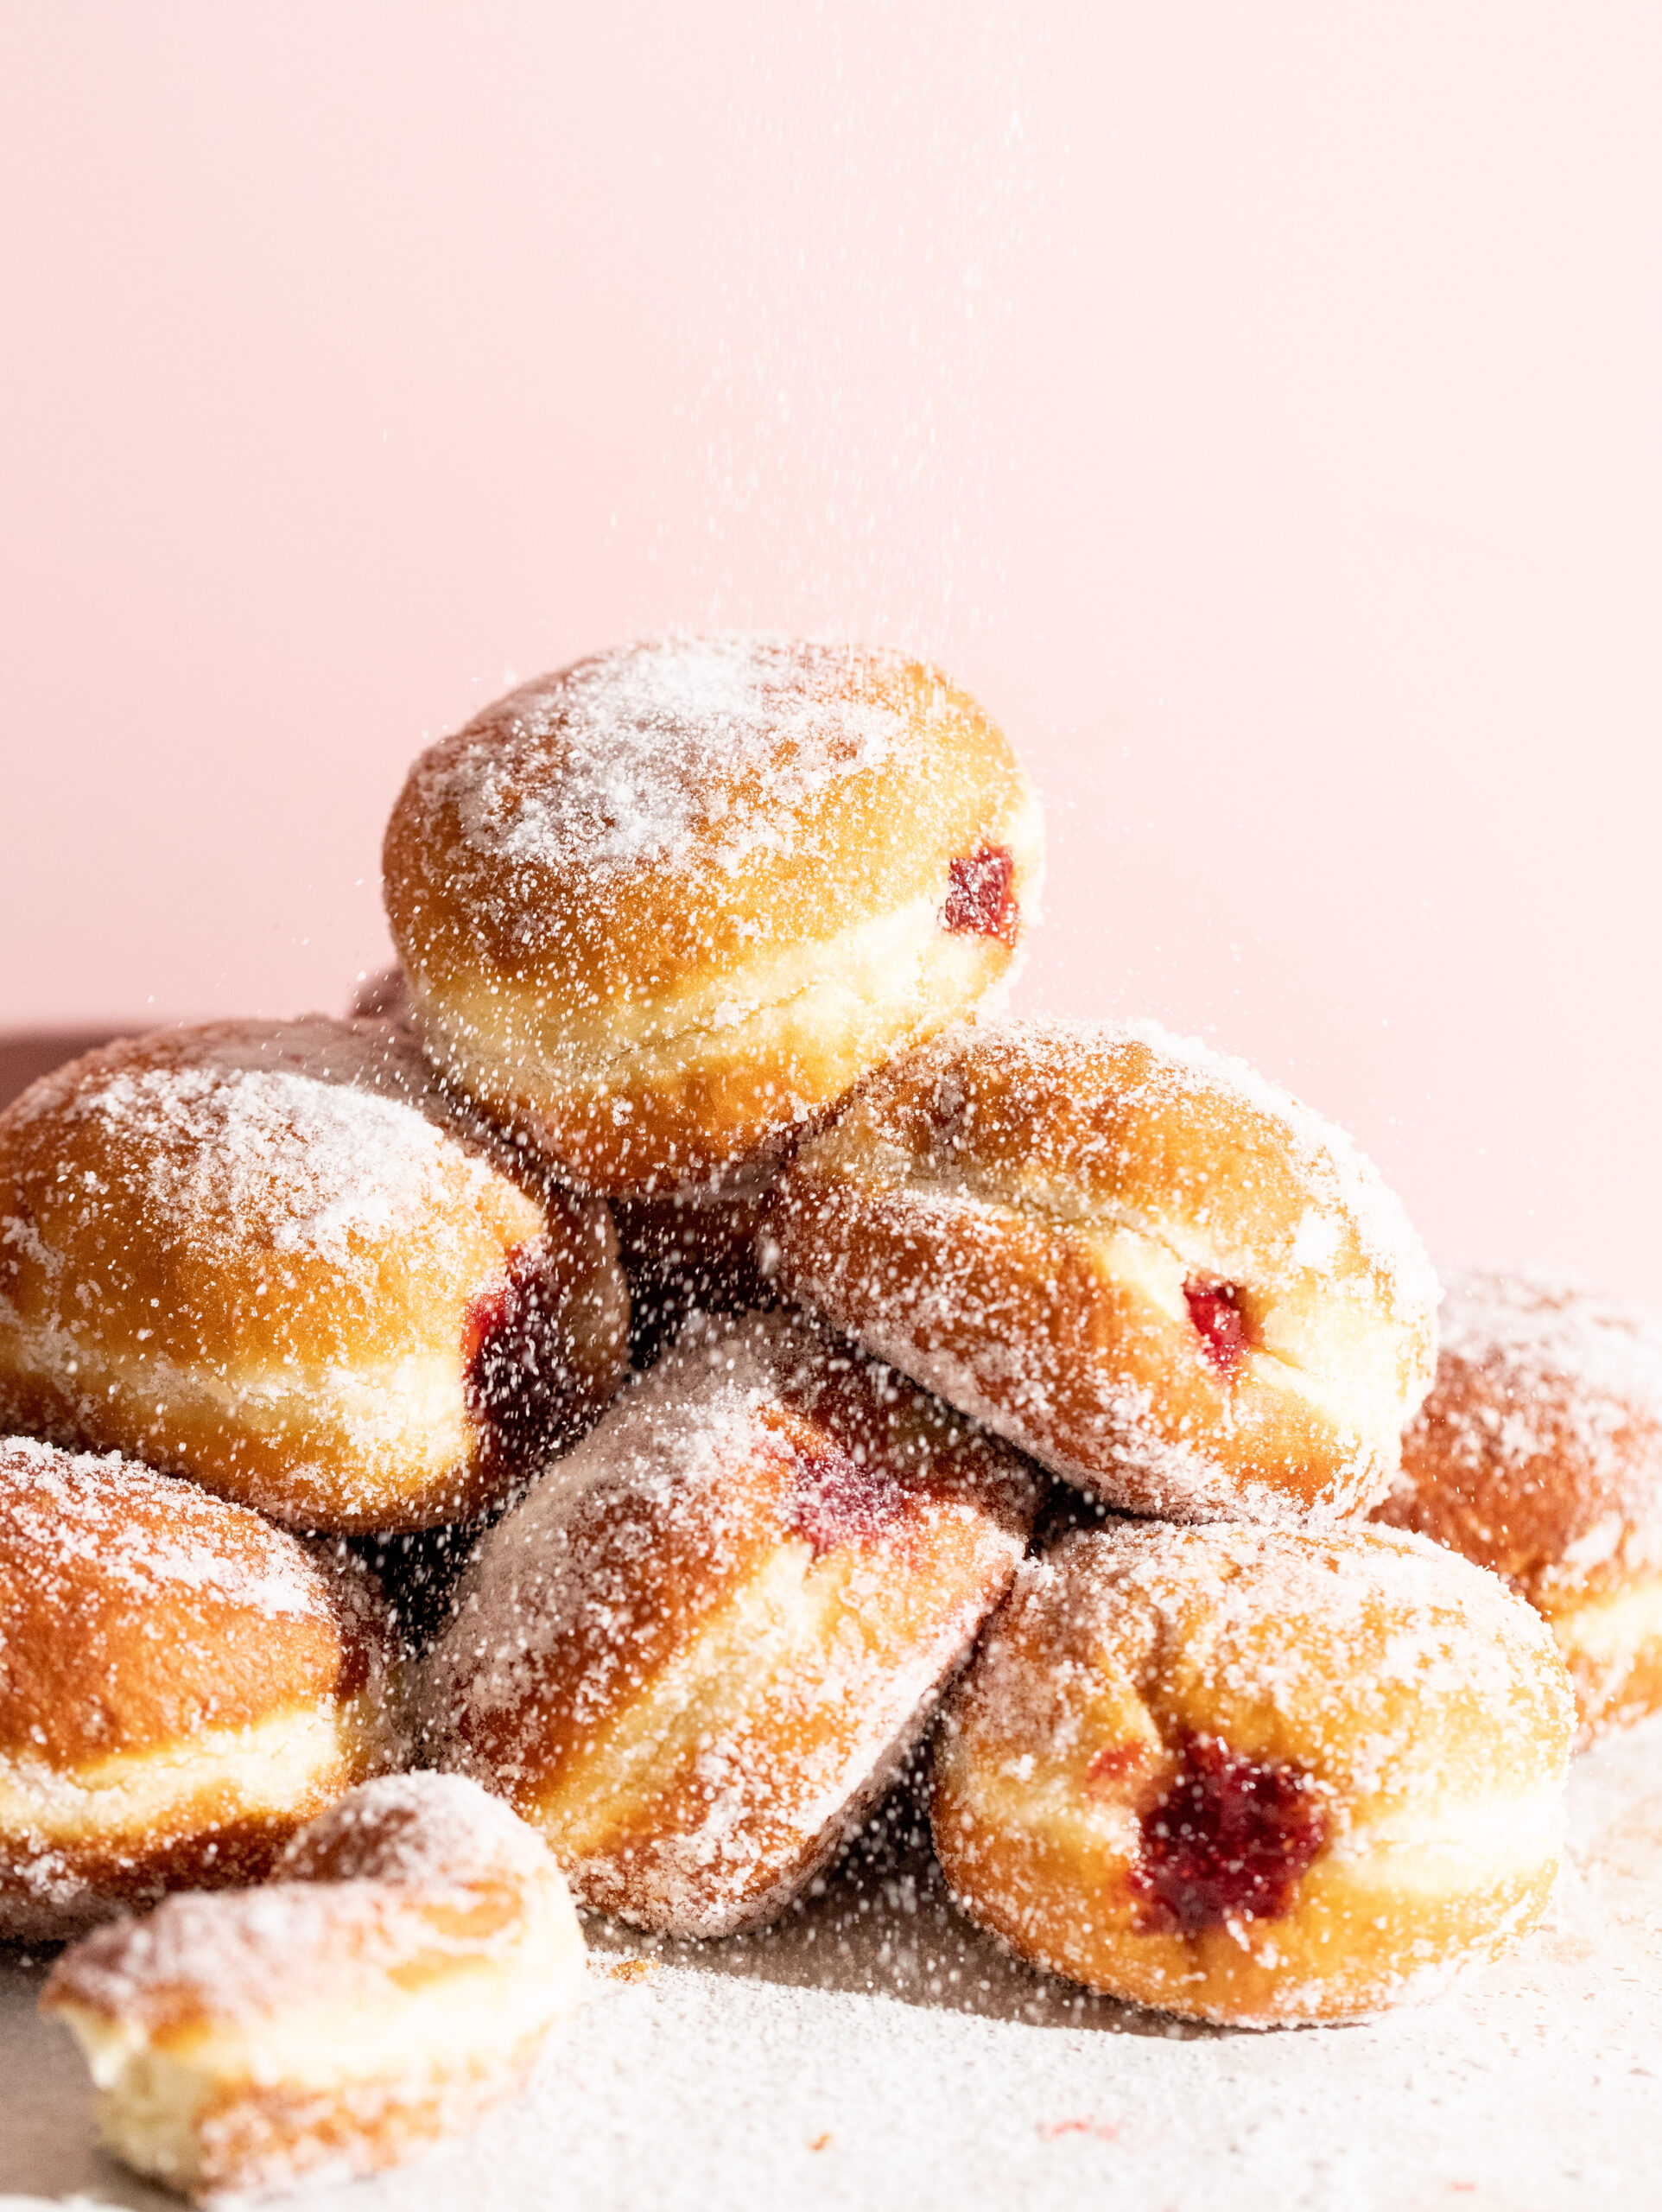 Side view of a pile of jam filled krapfen with sugar being poured over top.